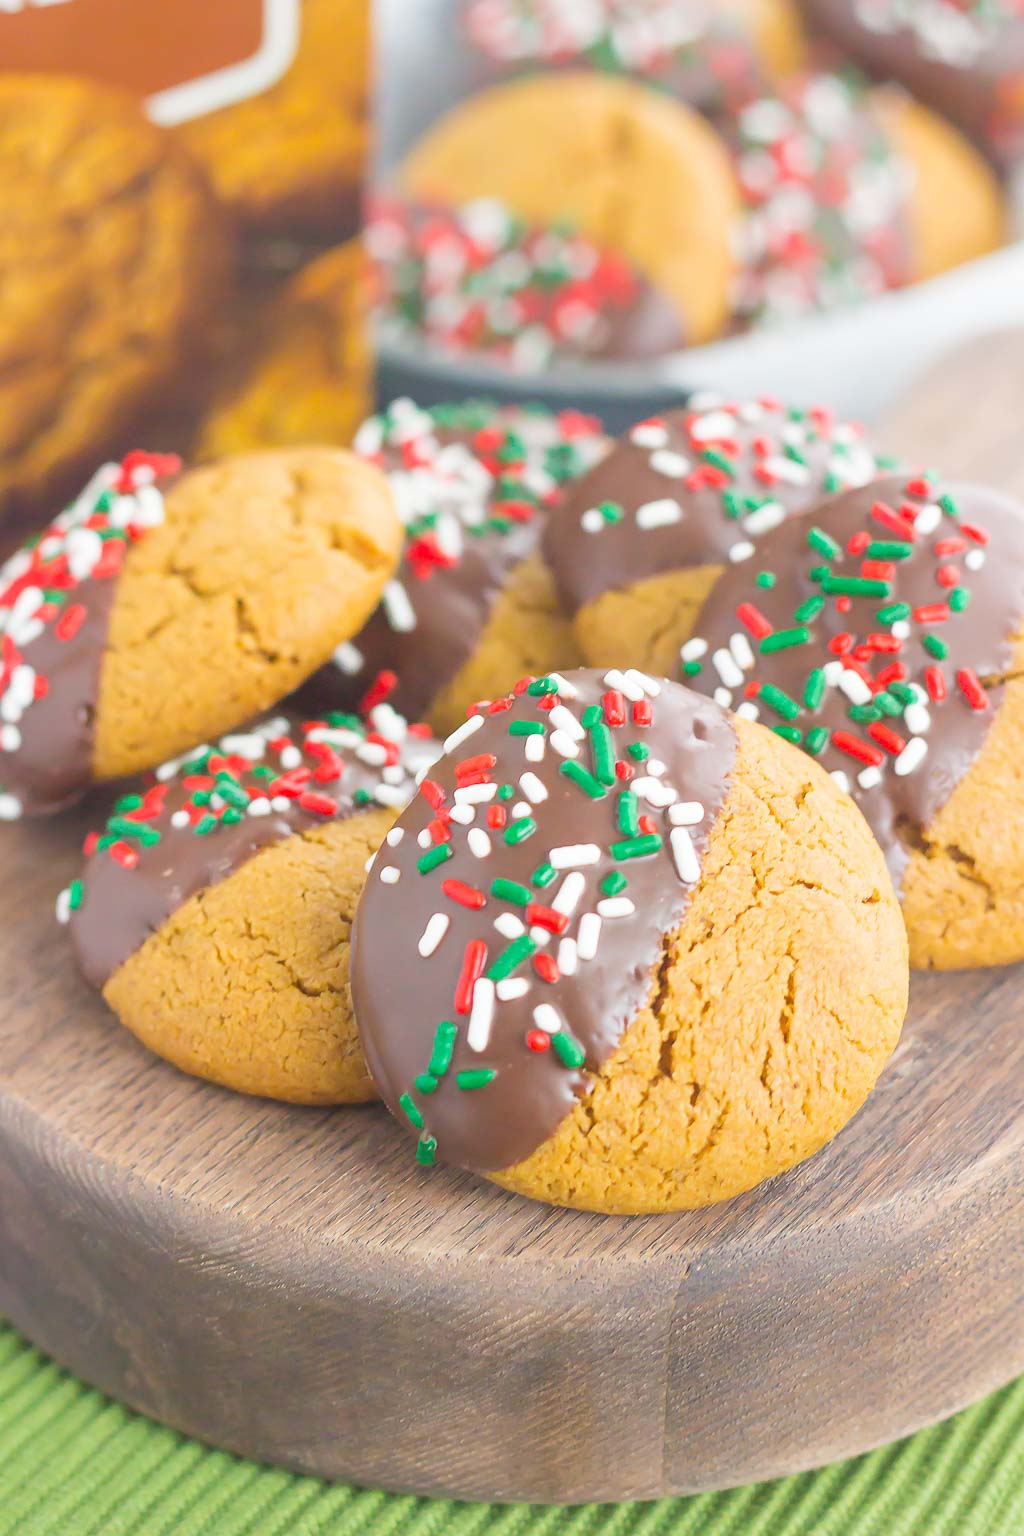 These Dark Chocolate Dipped Gingerbread Cookies are soft, sweet and perfect for the holidays. Made in one bowl and topped with decadent dark chocolate, this easy cookie will quickly become a new favorite!